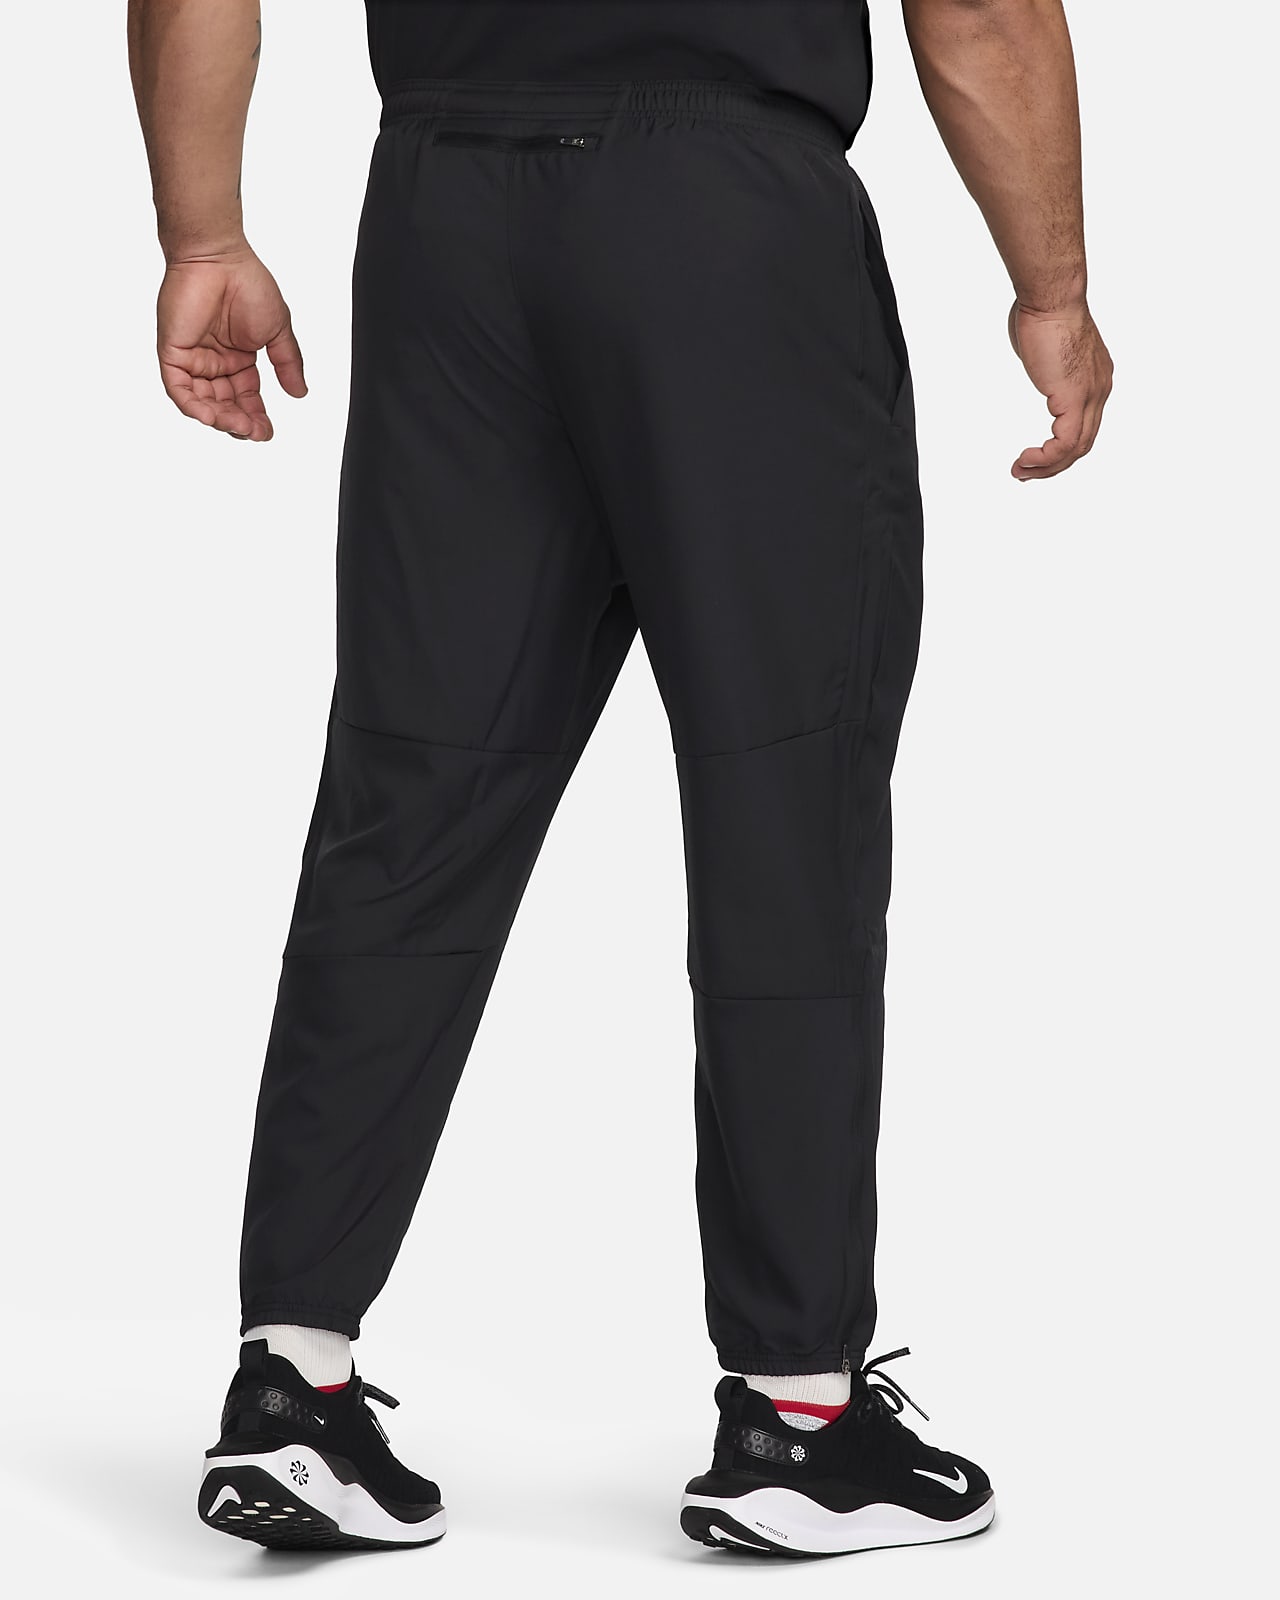 Under Armour, Pants, Under Armour Workout Pants Storm Run In Black Size M